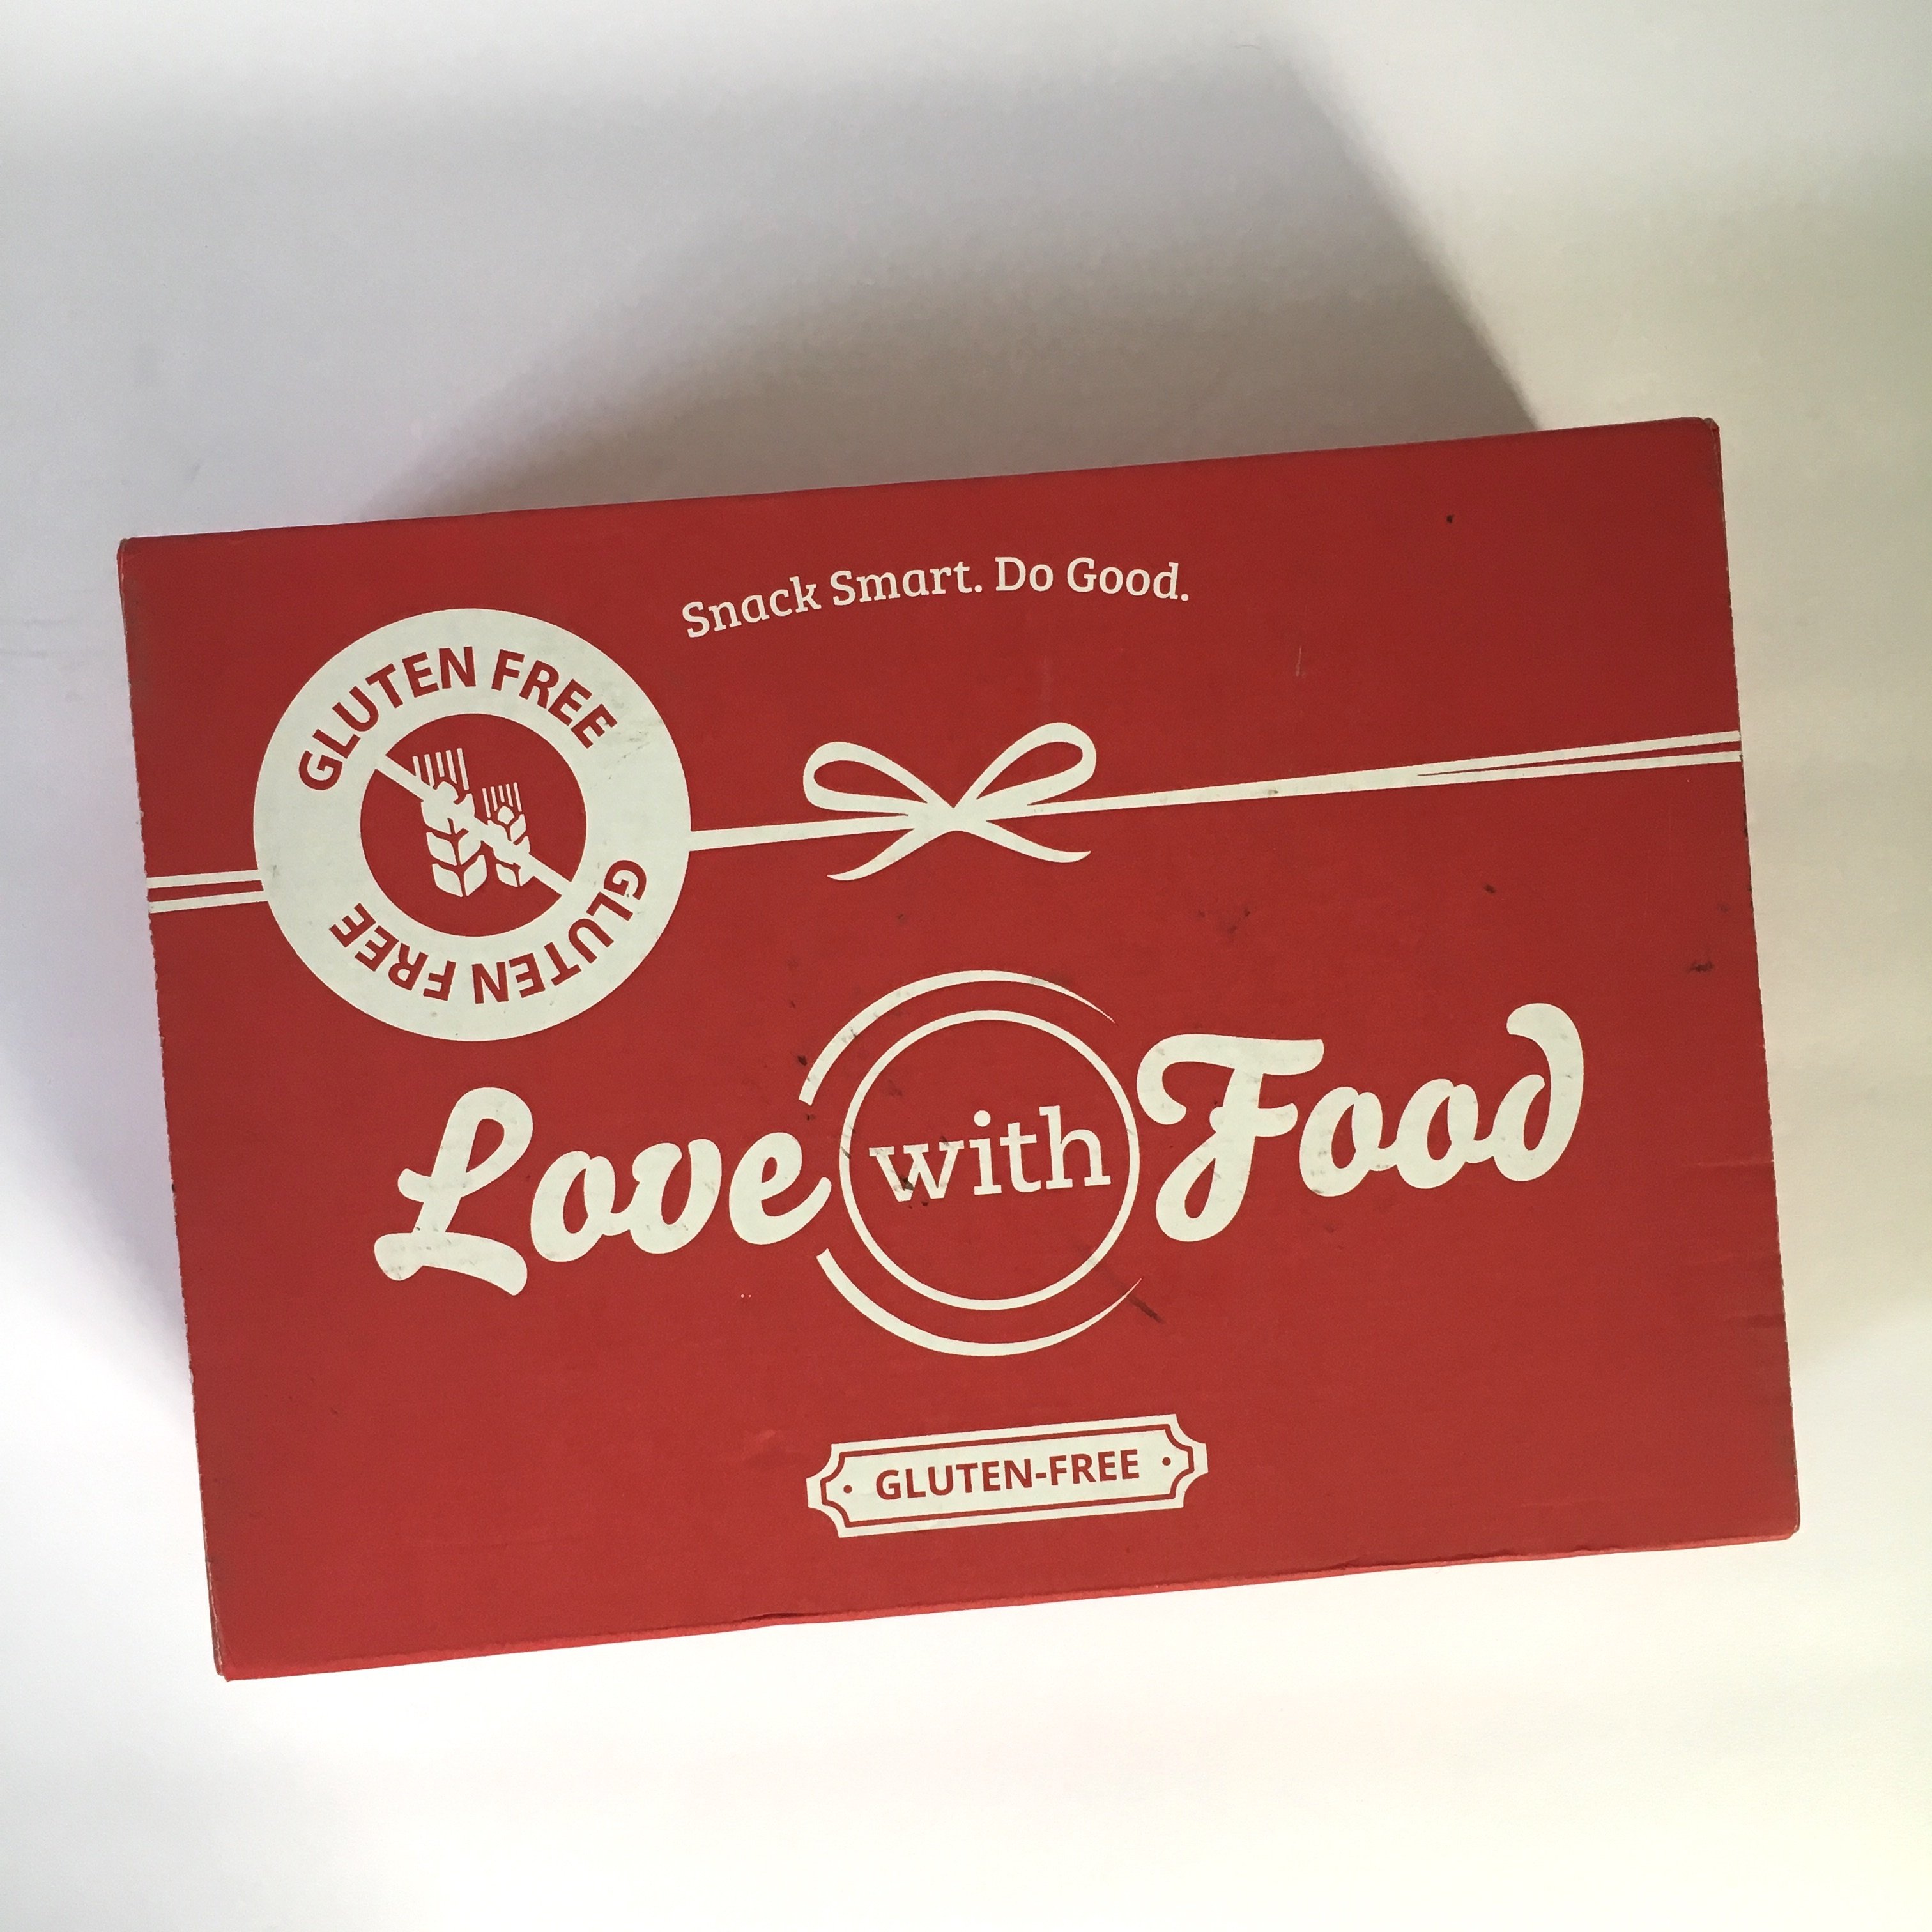 Love with Food Gluten Free Box Review + Coupon – July 2018